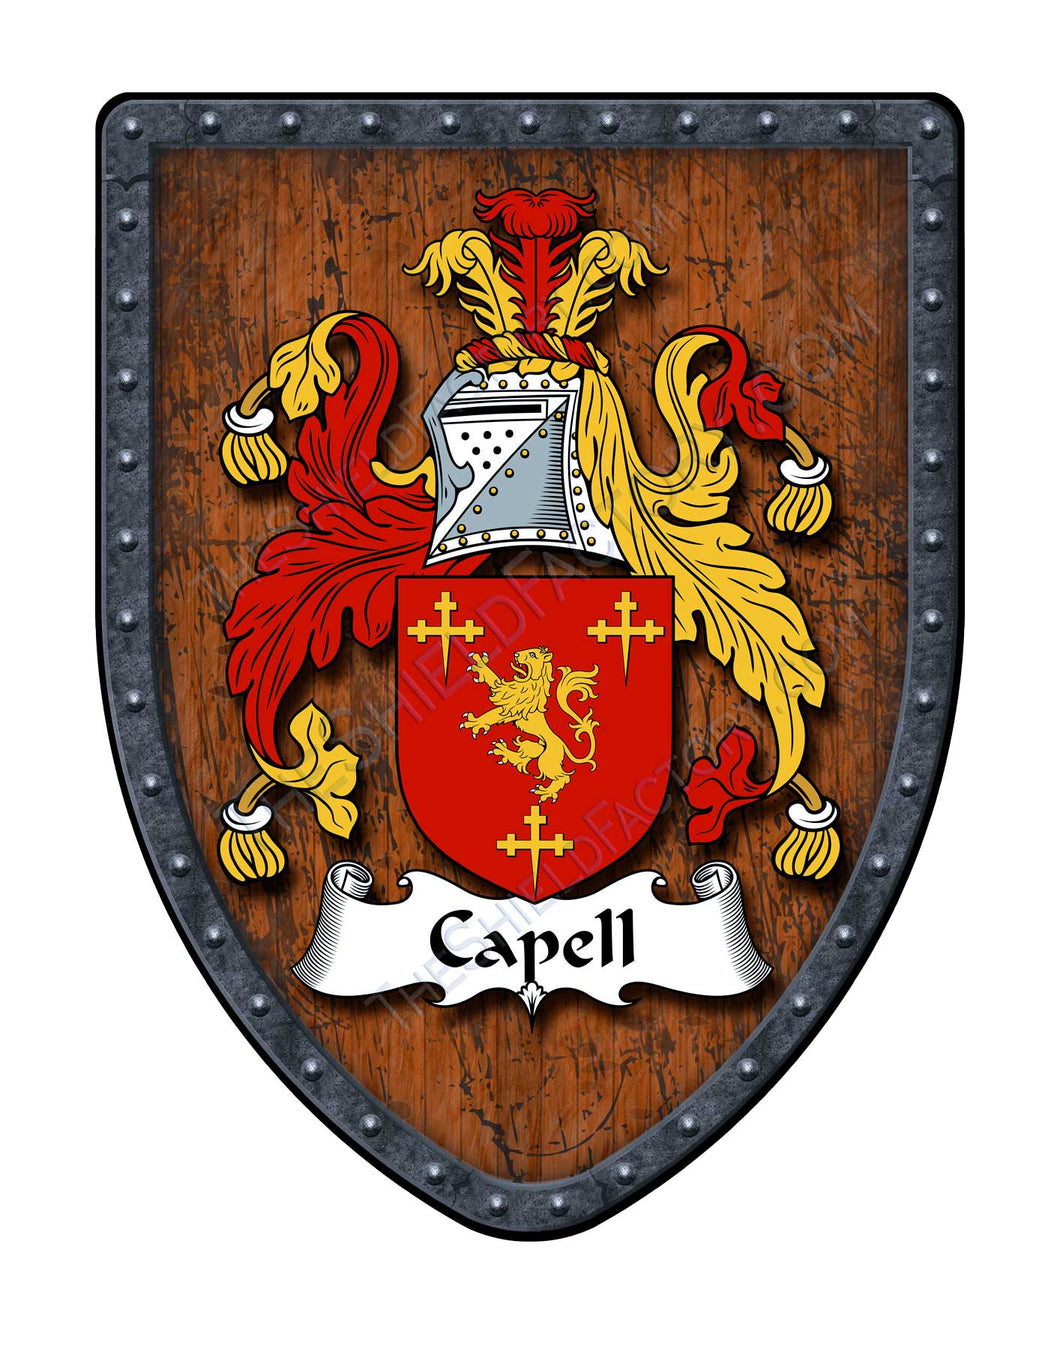 Capell Coat of Arms Family Crest